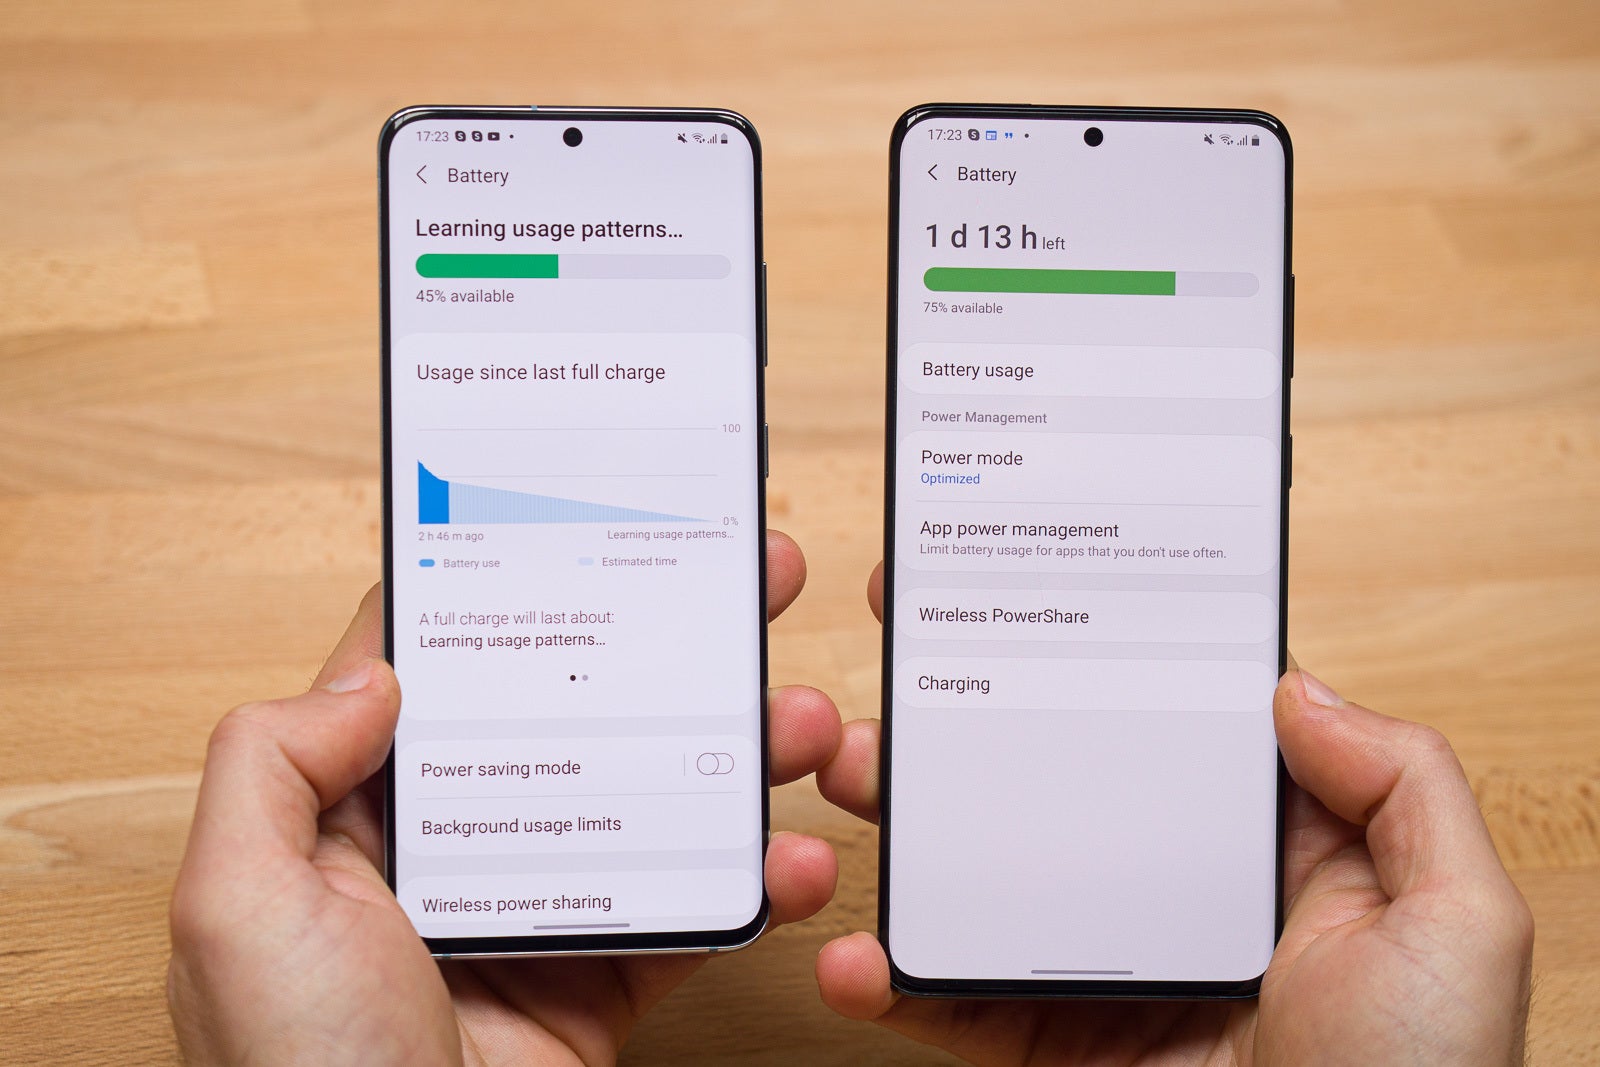 One UI 3.0 on the left, One UI 2.5 on the right - Samsung One UI 3.0 review